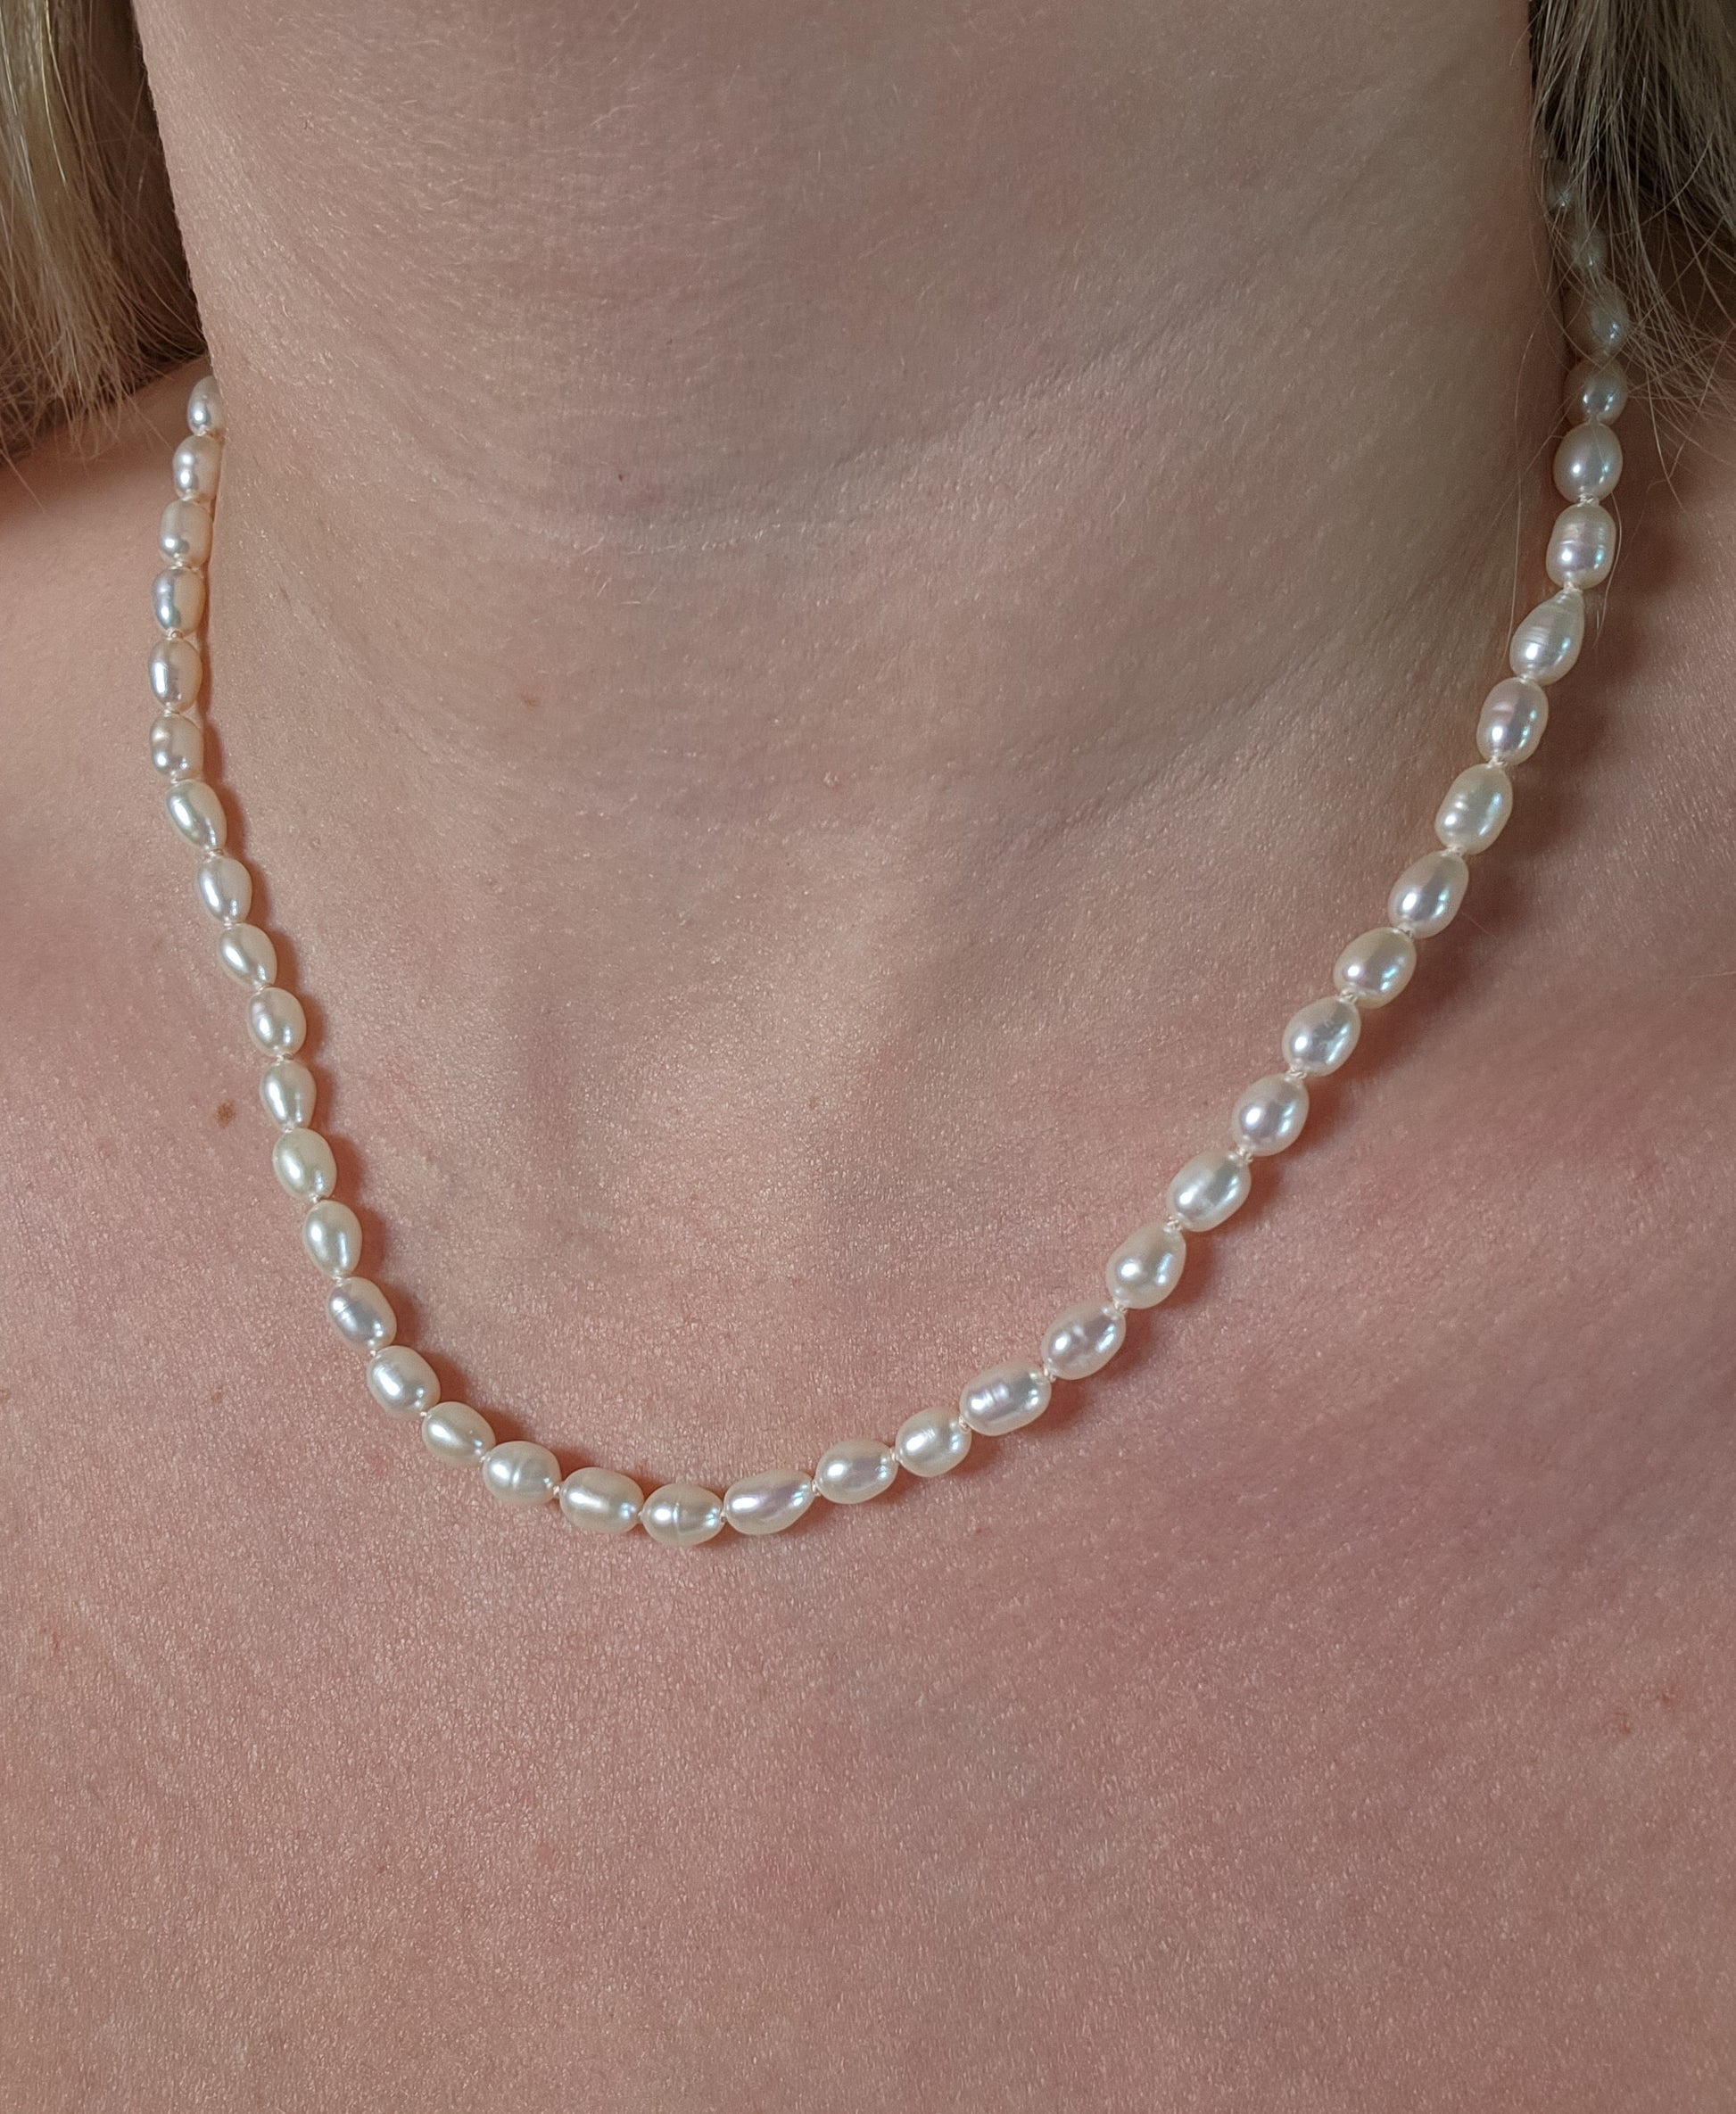 june pearl birthstone knotted necklace